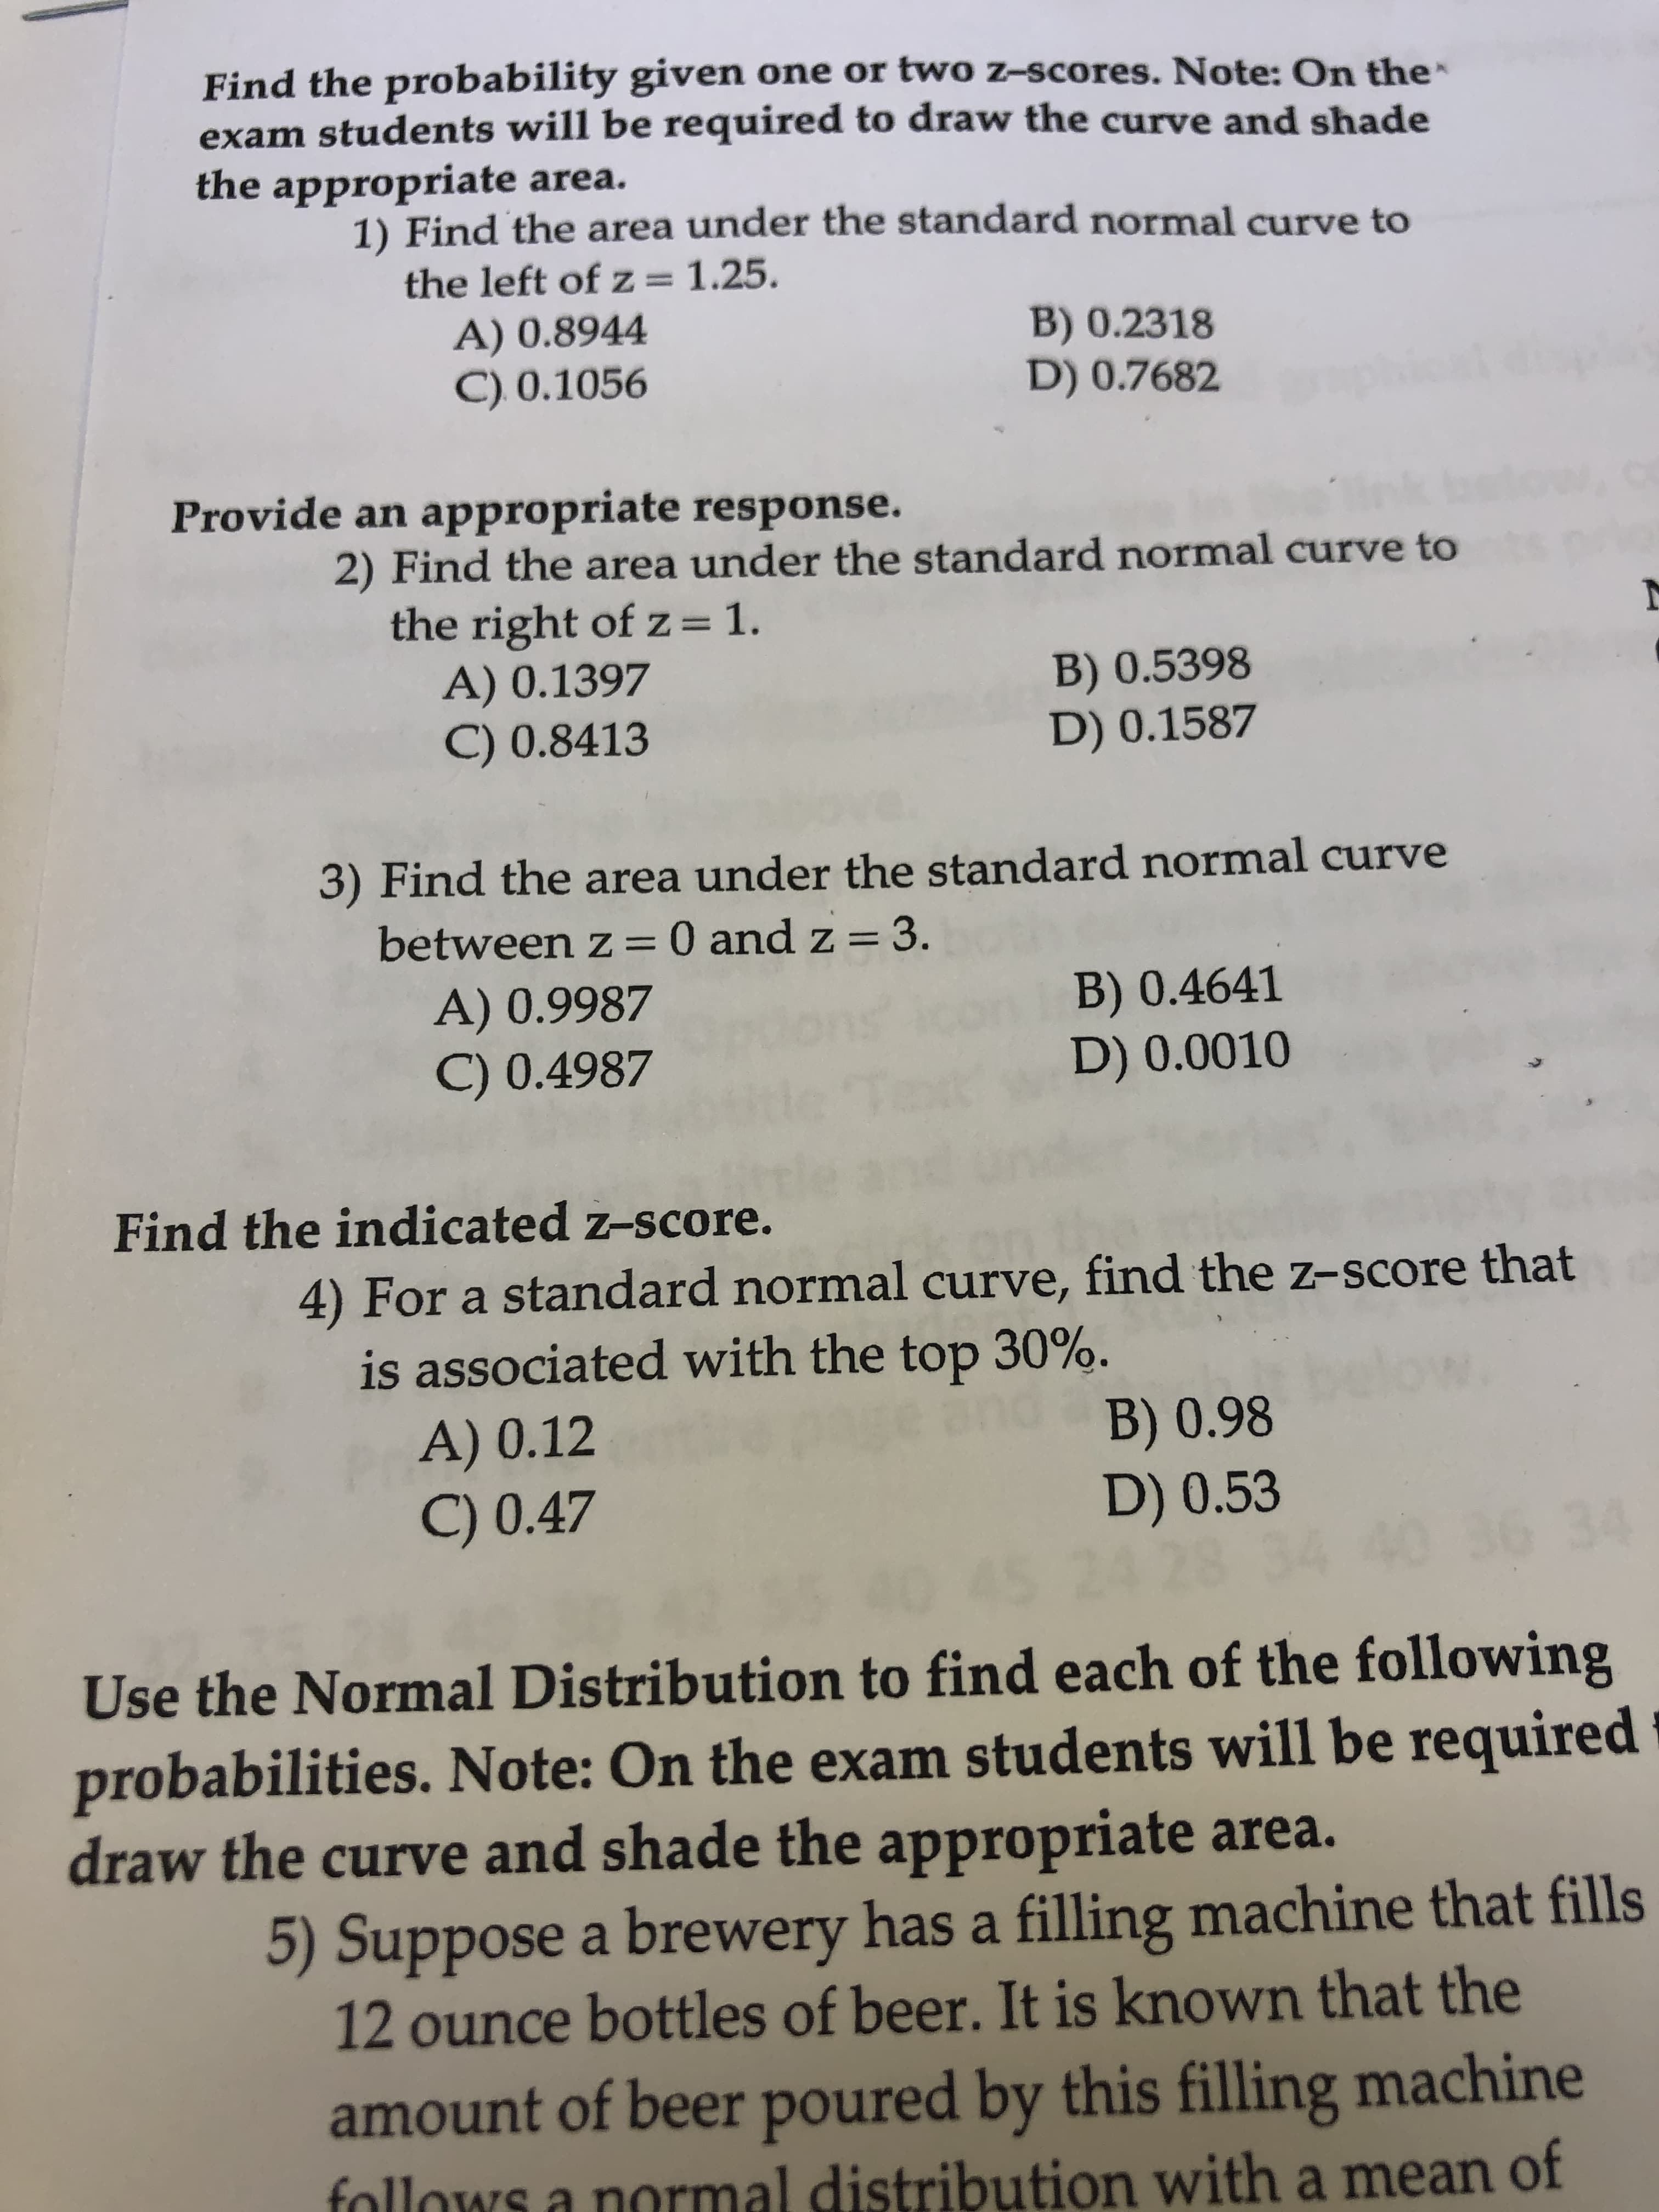 Find the probability given one or two z-scores. Note: On the
exam students will be required to draw the curve and shade
the appropriate area.
1) Find the area under the standard normal curve to
the left of z = 1.25.
A) 0.8944
C) 0.1056
B) 0.2318
D) 0.7682
Provide an appropriate response.
2) Find the area under the standard normal curve to
the right of z= 1.
A) 0.1397
C) 0.8413
%3D
B) 0.5398
D) 0.1587
3) Find the area under the standard normal curve
between z =0 and z = 3.
A) 0.9987
B) 0.4641
D) 0.0010
C) 0.4987
Find the indicated z-score.
4) For a standard normal curve, find the z-score that
is associated with the top 30%.
B) 0.98
D) 0.53
5 24 28 34
A) 0.12
C) 0.47
34
Use the Normal Distribution to find each of the following
probabilities. Note: On the exam students will be required
draw the curve and shade the appropriate area.
5) Suppose a brewery has a filling machine that fills
12 ounce bottles of beer. It is known that the
amount of beer poured by this filling machine
follows a normal distribution with a mean of
